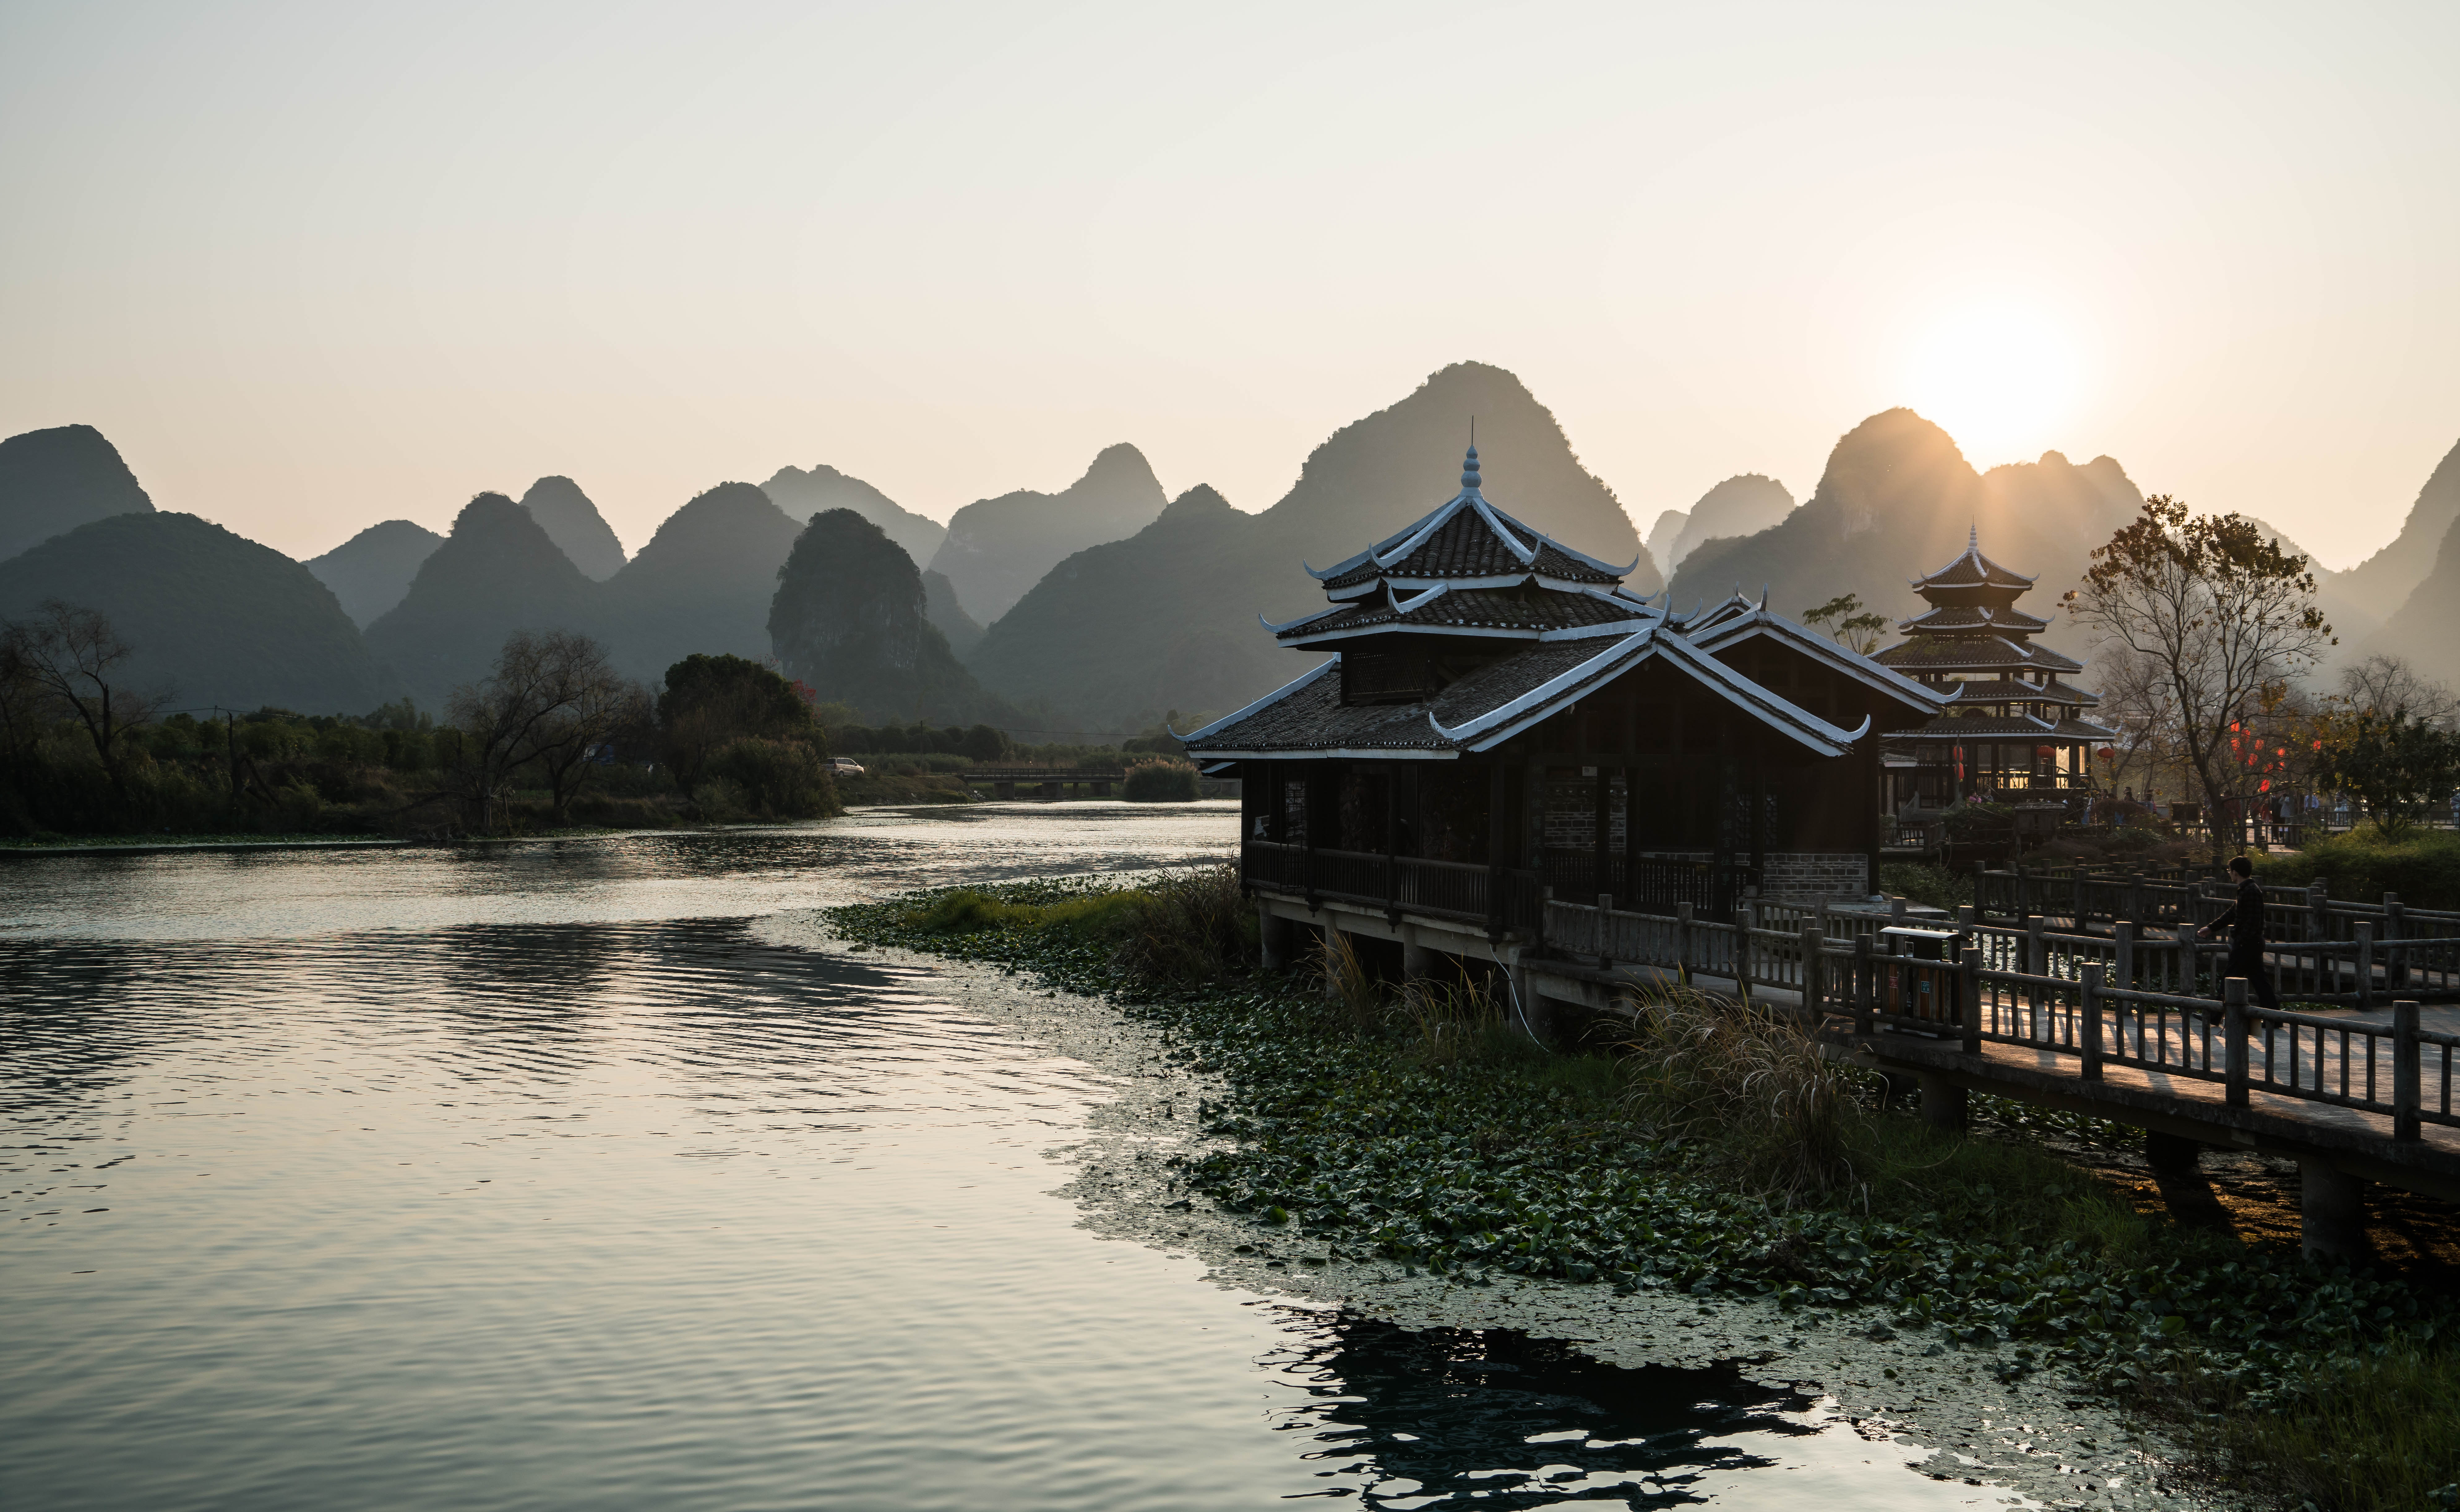 Wallpaper, chrisgoldny, chrisgoldphoto, chrisgoldphotos, chrisgoldberg, forsale, licensing, albumcover, albumcovers, bookcover, bookcovers, Guilin, guilinprovince, guangxi, sunset, limestone, mountains, landscapes, Sony, sonyimages, sonya7rii